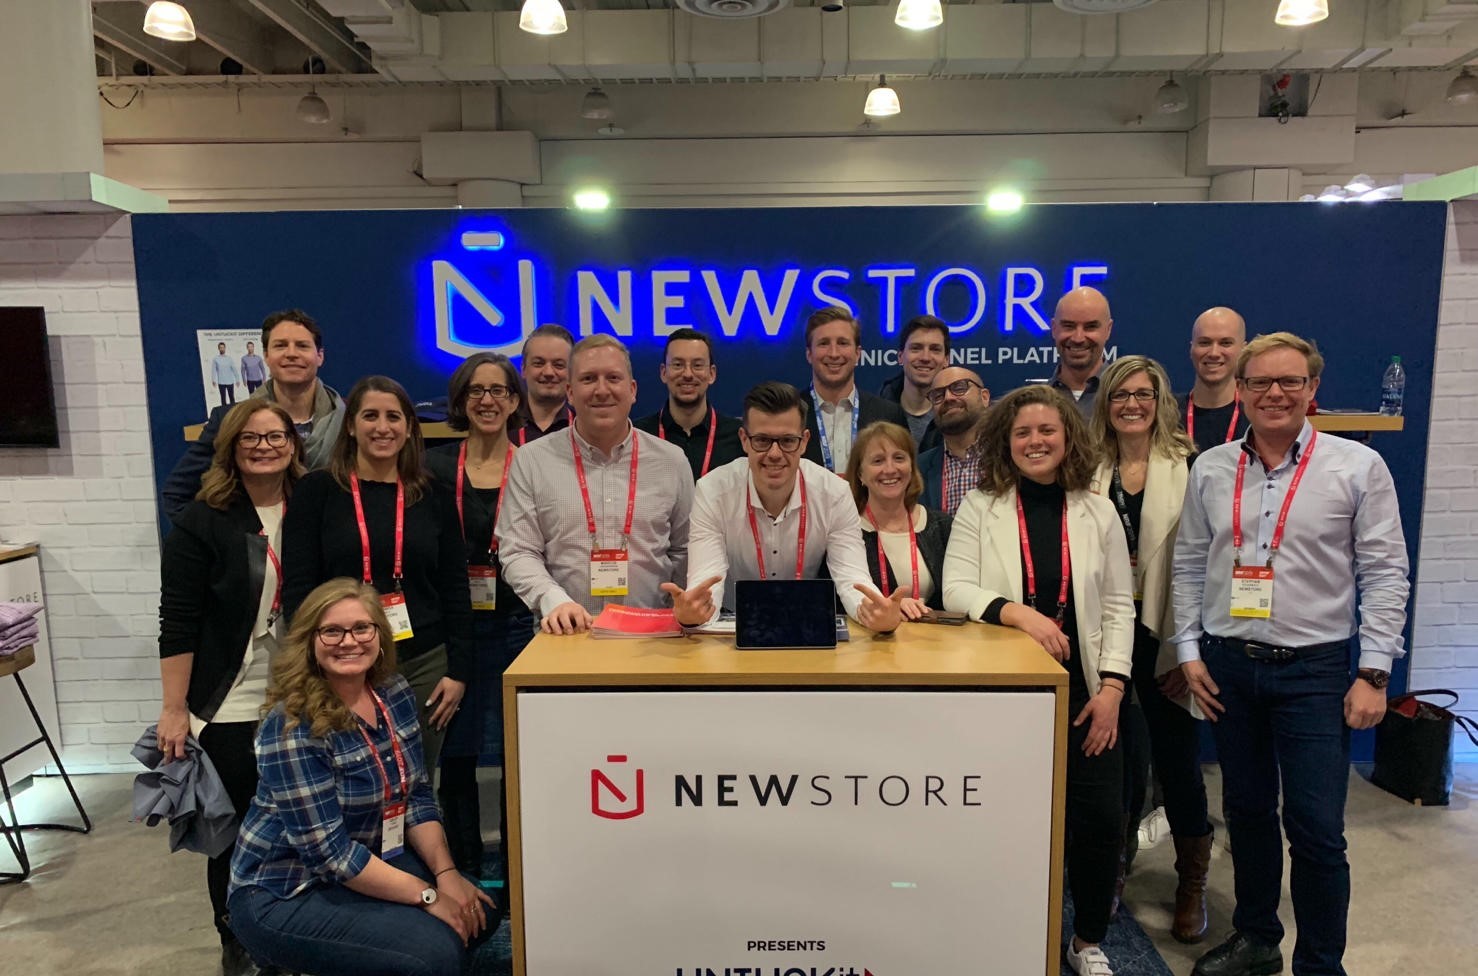 NewStore team presents at their booth in a trade show